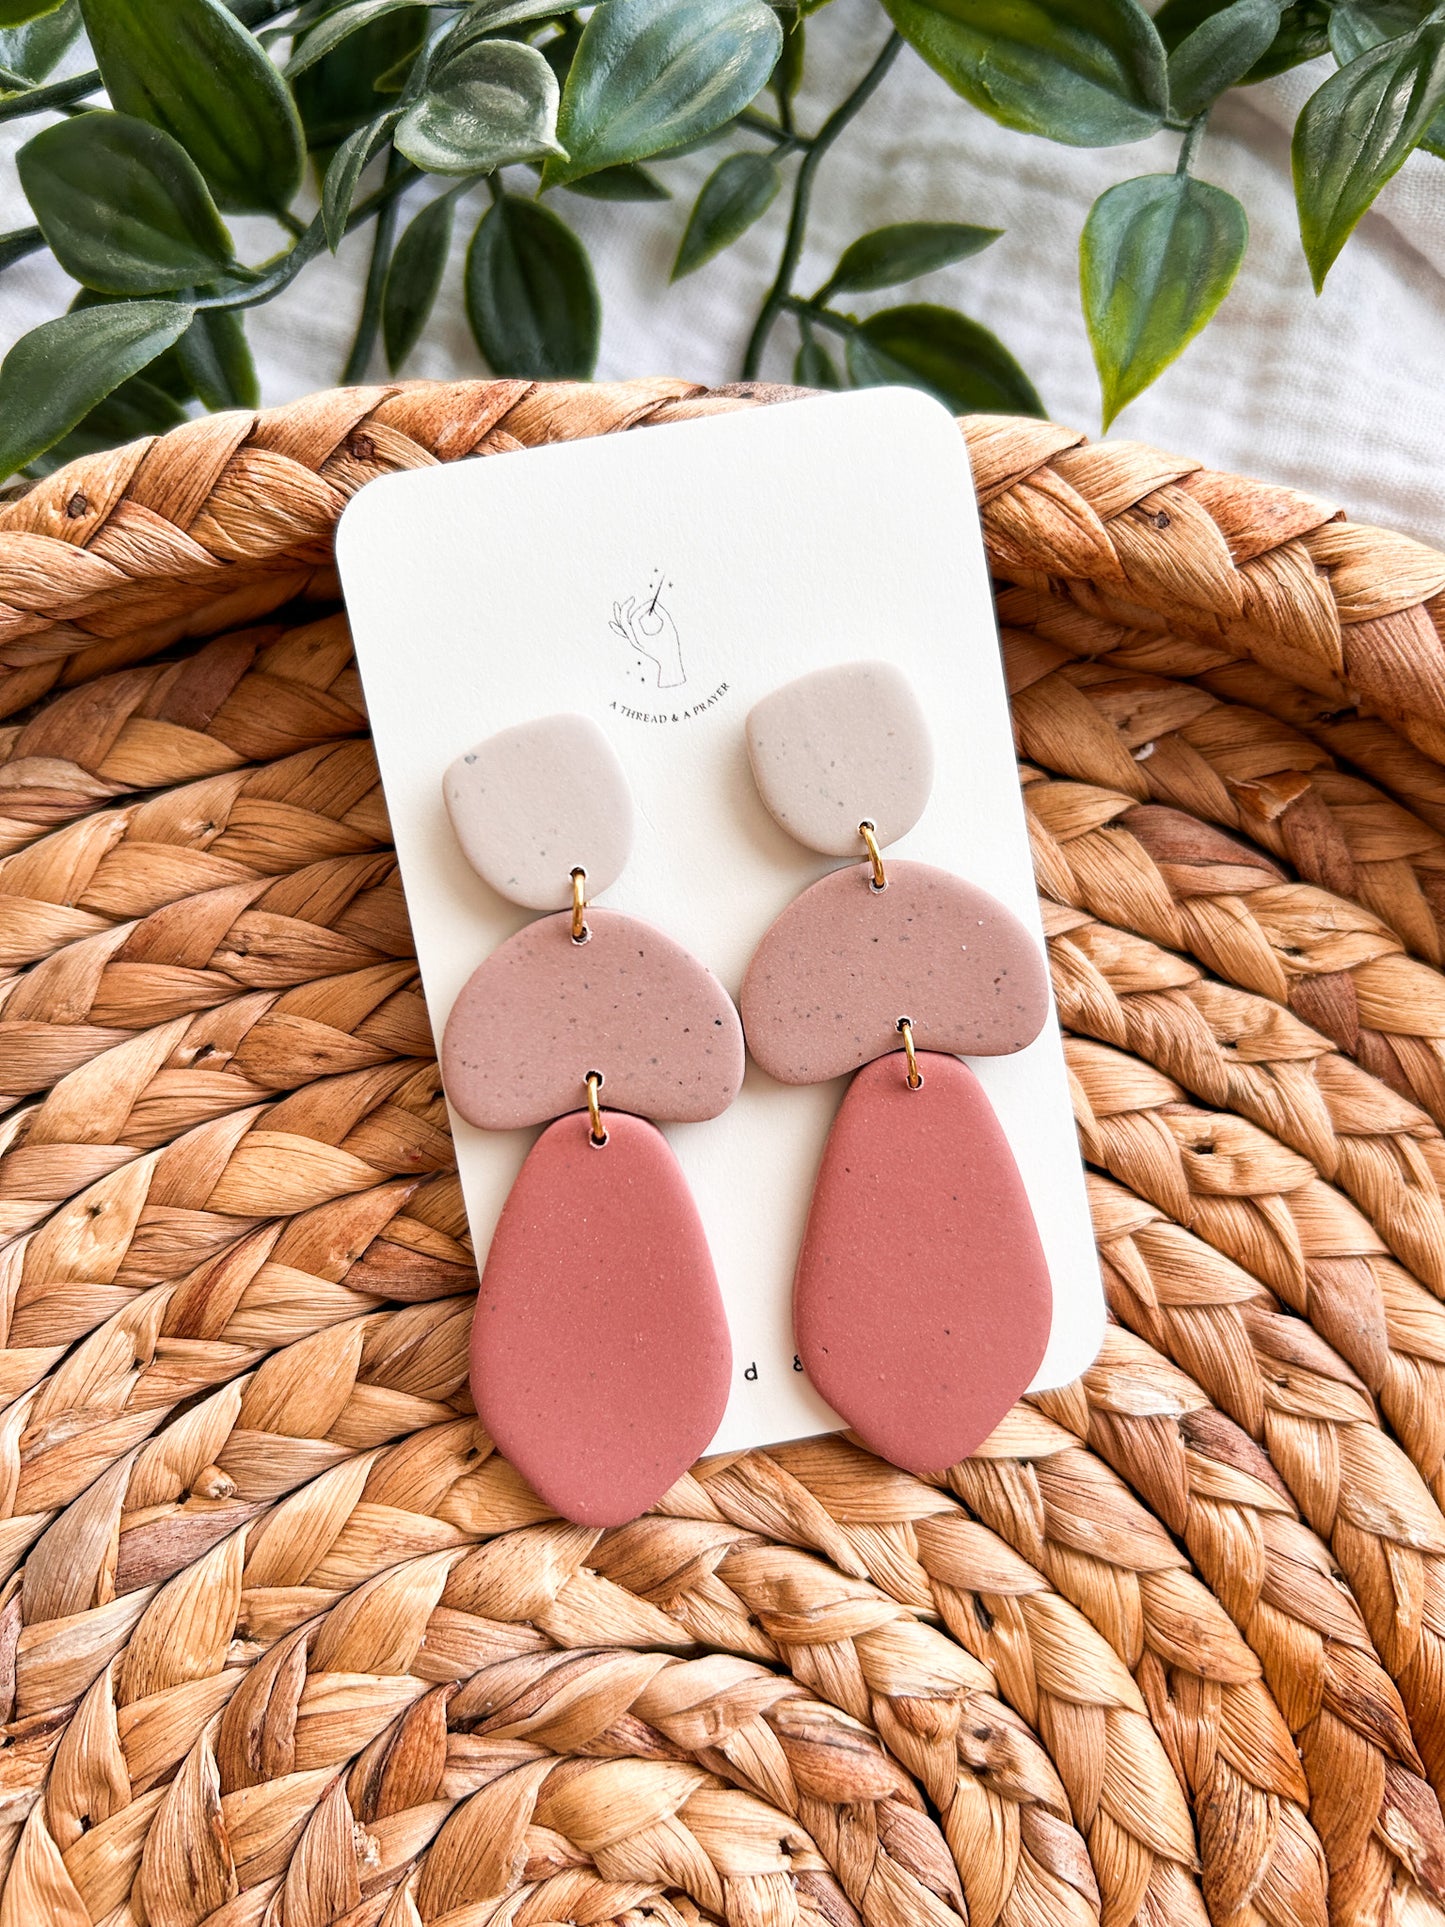 Soft Pink Romantic Dangle Polymer Clay Earrings | Spring Fashion | Spring Color Earrings | Statement Earrings | Lightweight